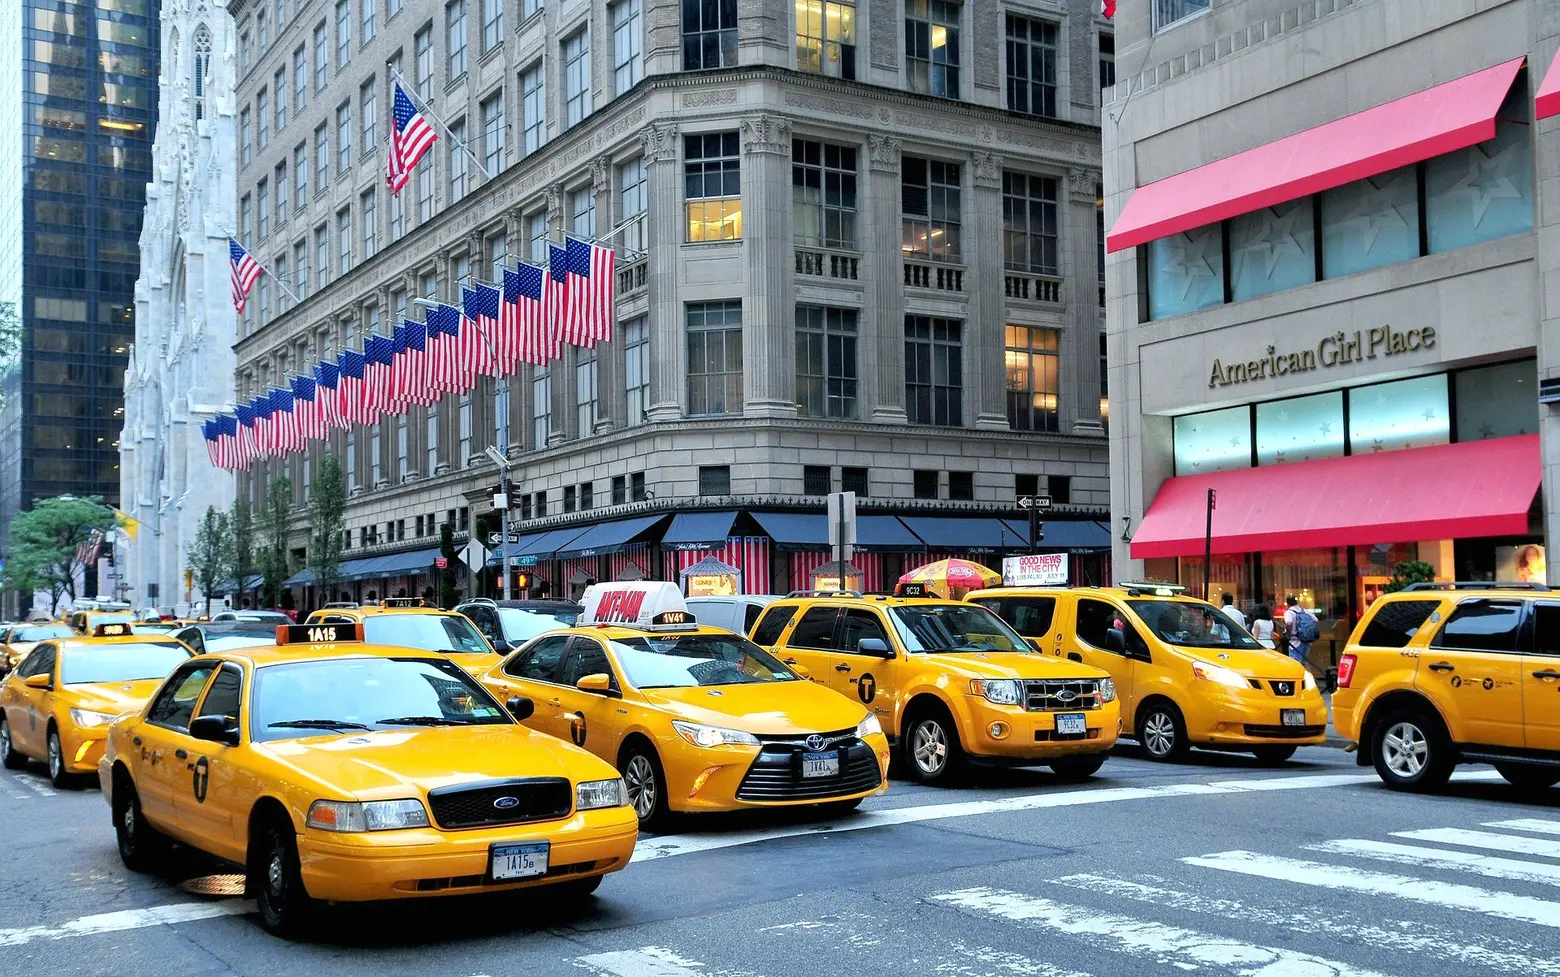 Fifth Avenue, NYC cabs